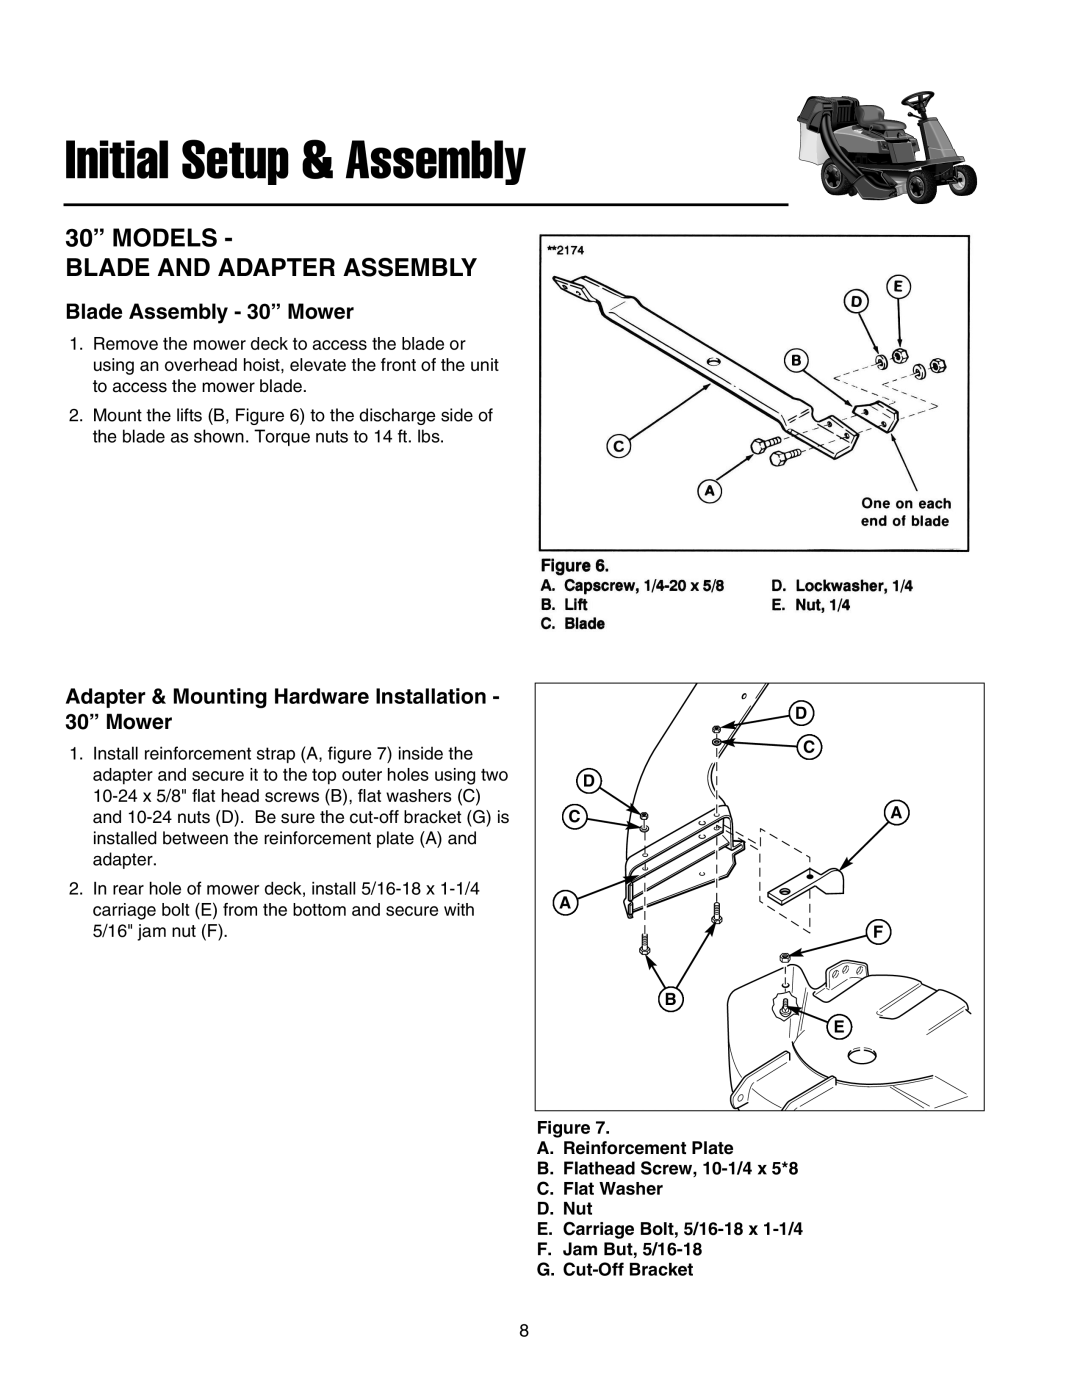 Simplicity 1692149, 1692150 Initial Setup & Assembly, 30” MODELS BLADE AND ADAPTER ASSEMBLY, Blade Assembly - 30” Mower 